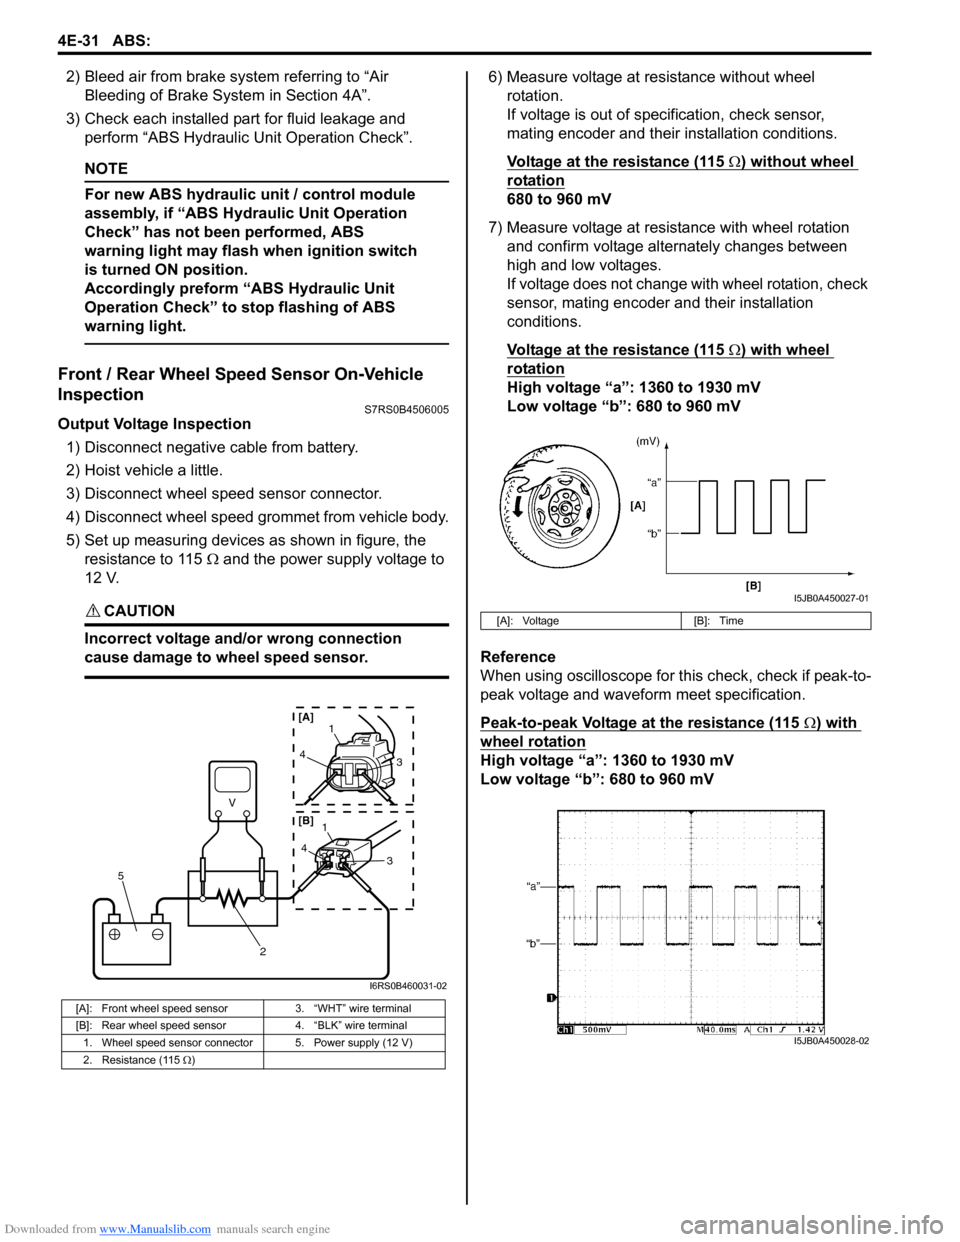 SUZUKI SWIFT 2006 2.G Service Owners Guide Downloaded from www.Manualslib.com manuals search engine 4E-31 ABS: 
2) Bleed air from brake system referring to “Air Bleeding of Brake System in Section 4A”.
3) Check each installed part for flui